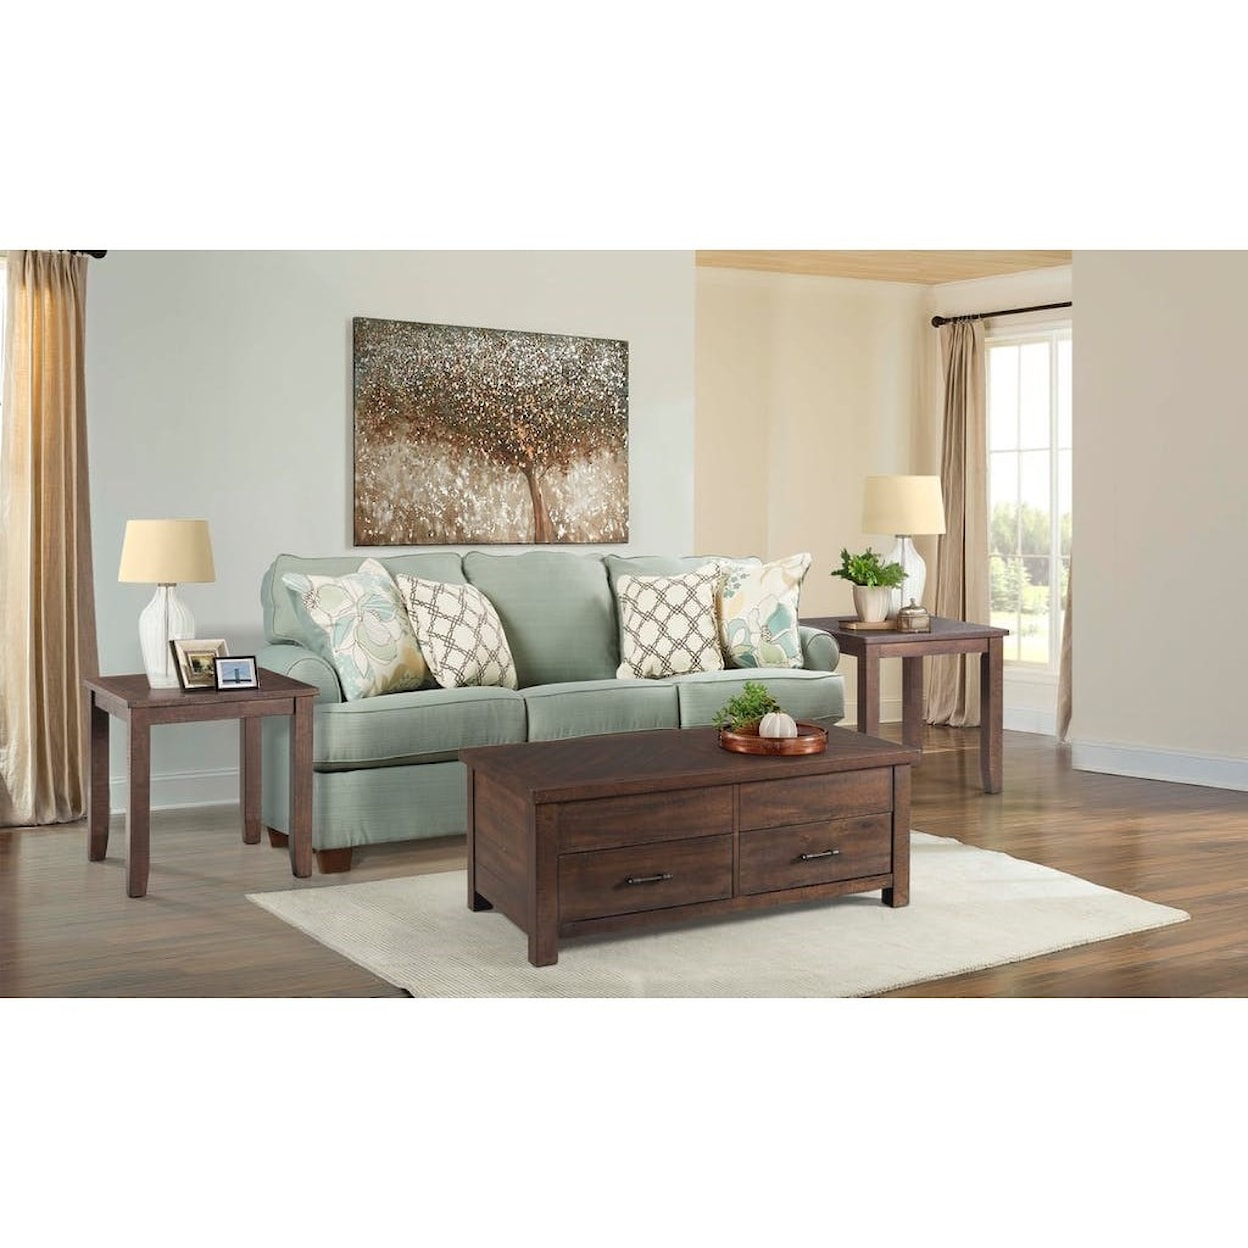 Elements International Jax Coffee Table with Lift Top